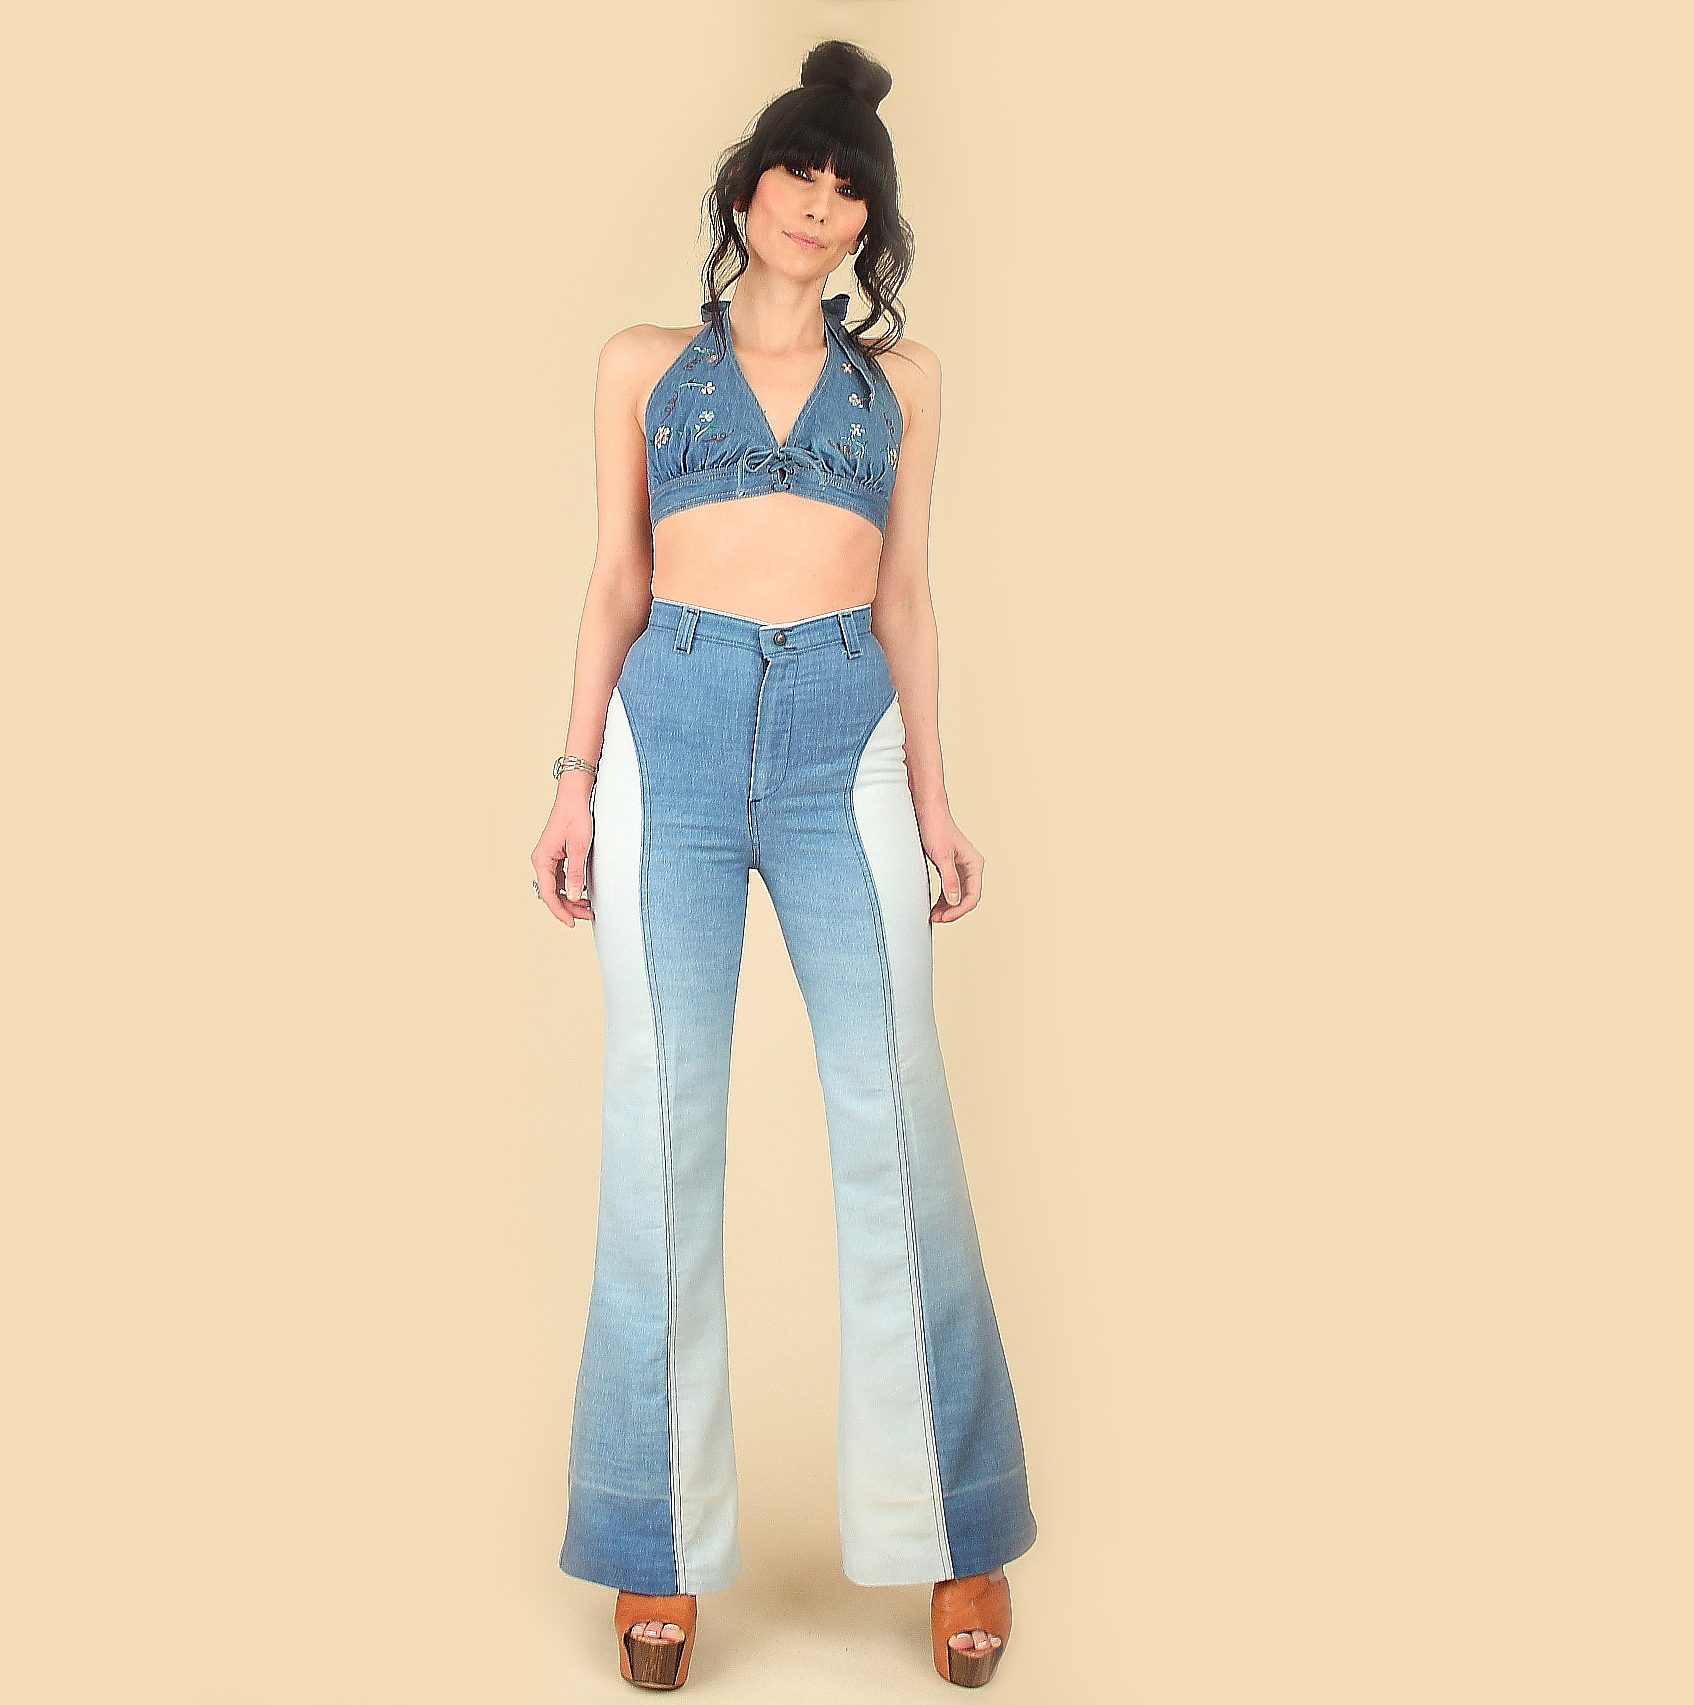 Rare DITTOS Vintage 70's Saddle Back Jeans // High Waisted // 2 Toned ...